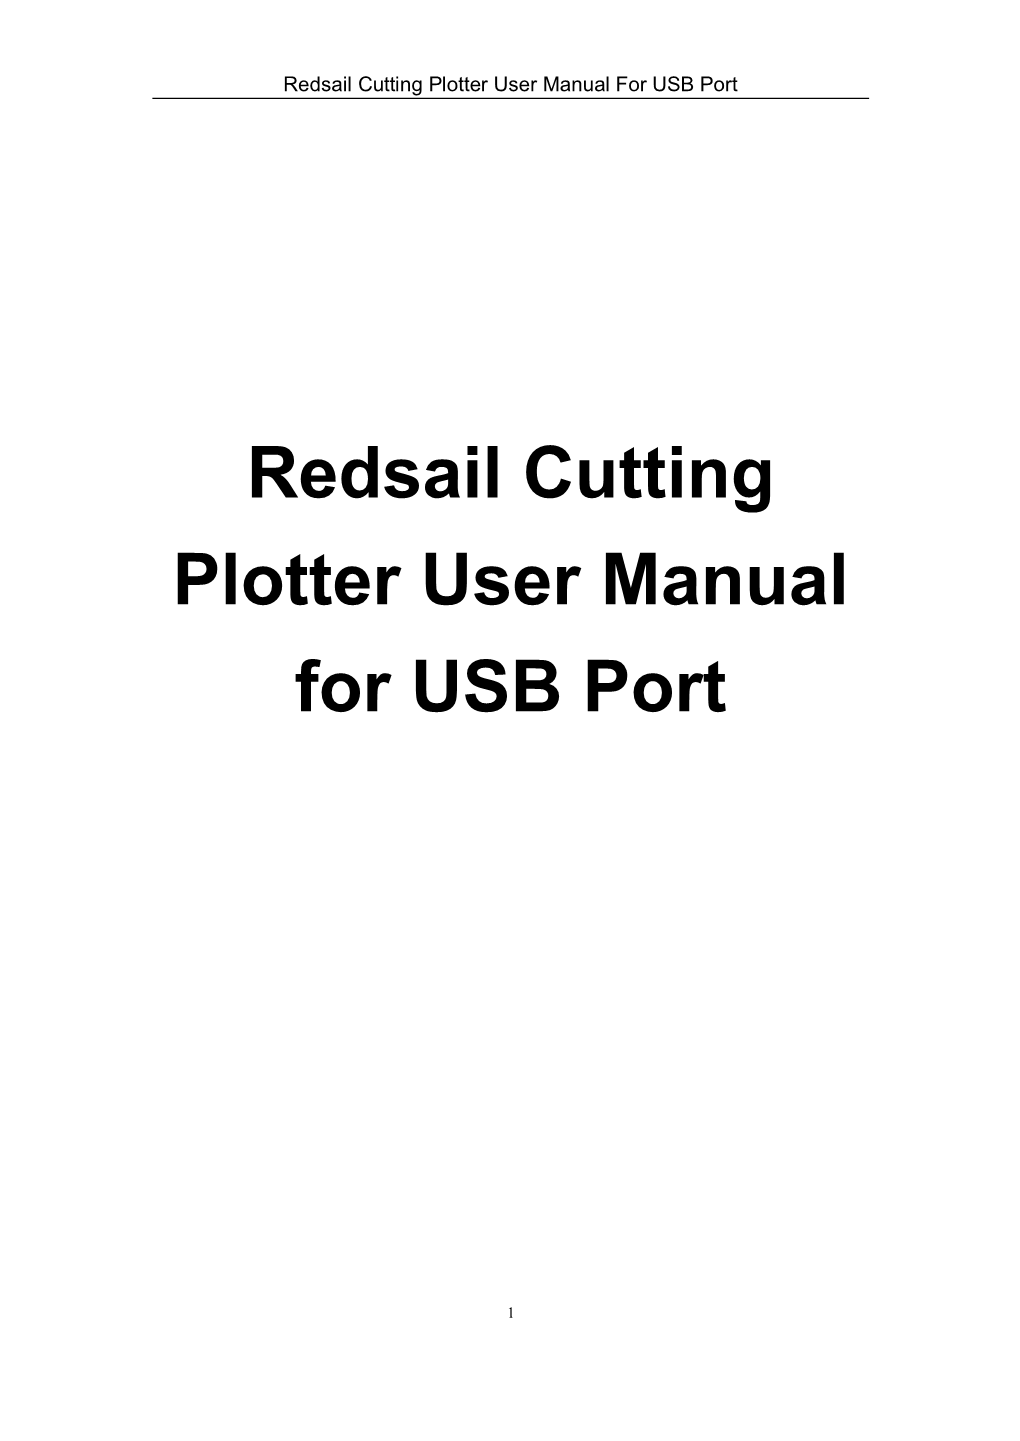 Redsail Cutting Plotter User Manual for USB Port